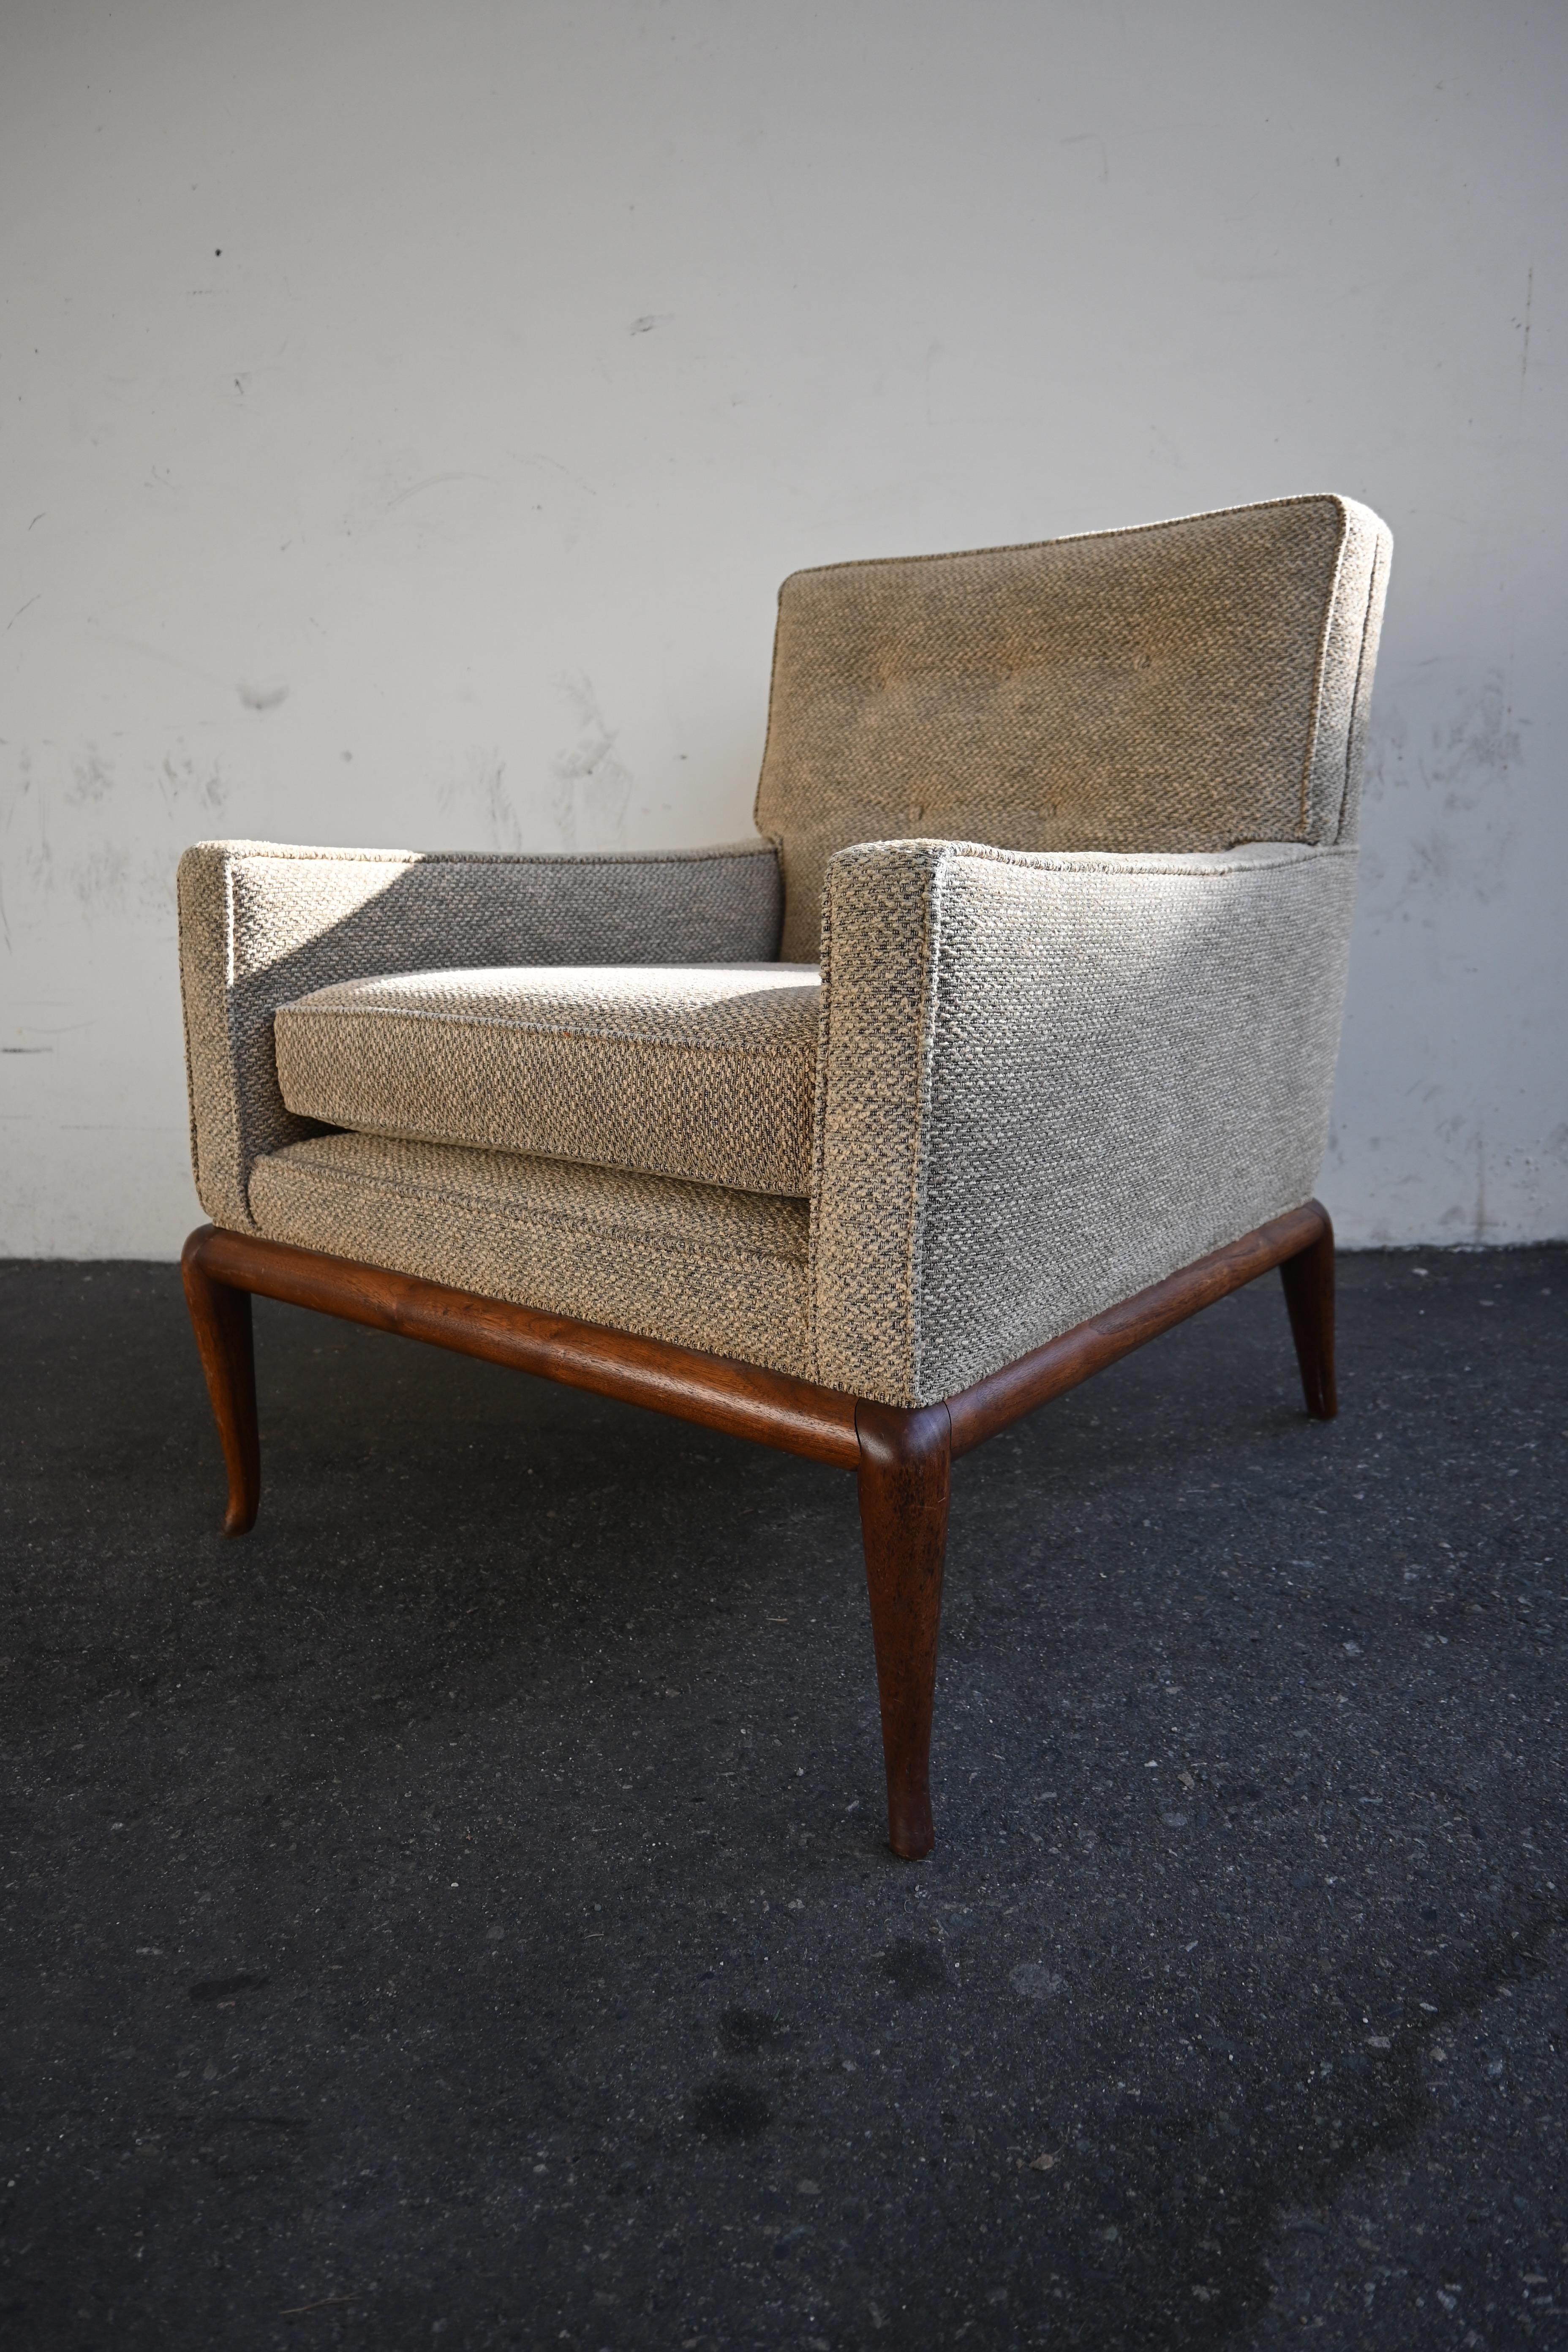 Pair of T.H. Robsjohn-Gibbings for Widdicomb club chairs, 1950s.

Measures: 32” H x 25.5” W x 27” D x 19” SH

Pair of American mid-century lounge / armchairs with newly upholstered in a beautiful oatmeal wool fabric and a walnut frame, resting